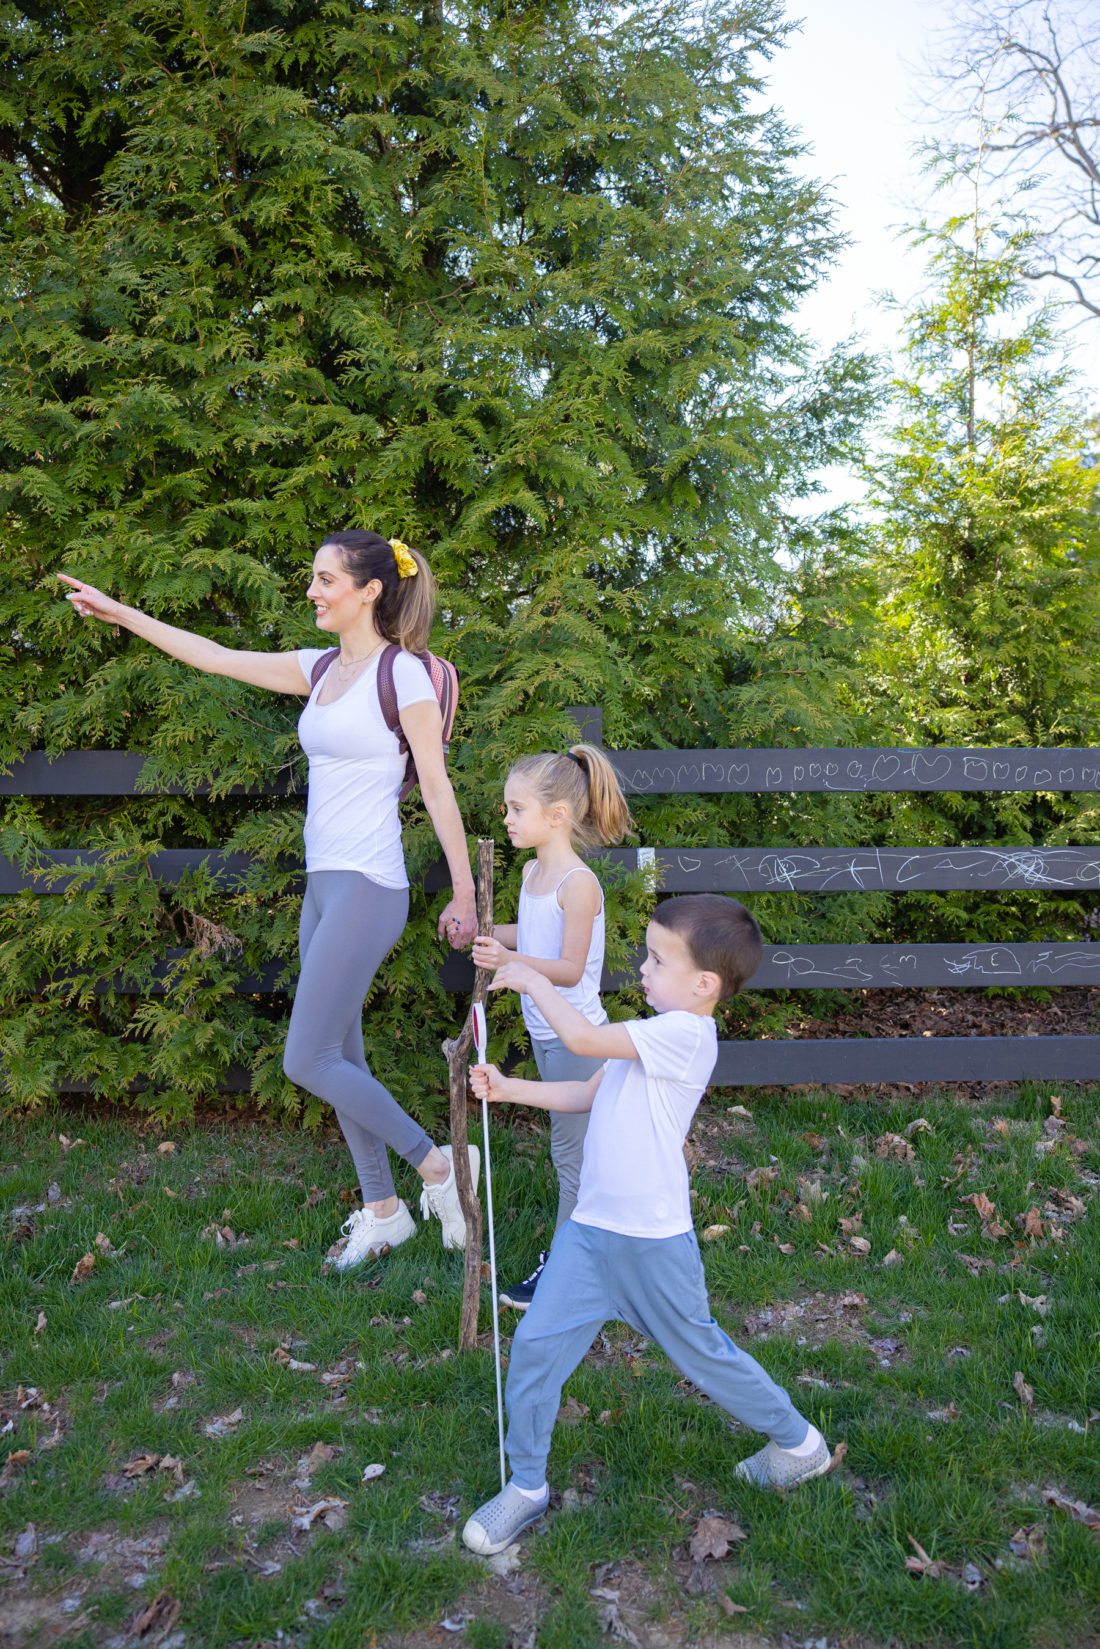 Eva Amurri shares some Spring Fitness Challenges to Keep Kids Active